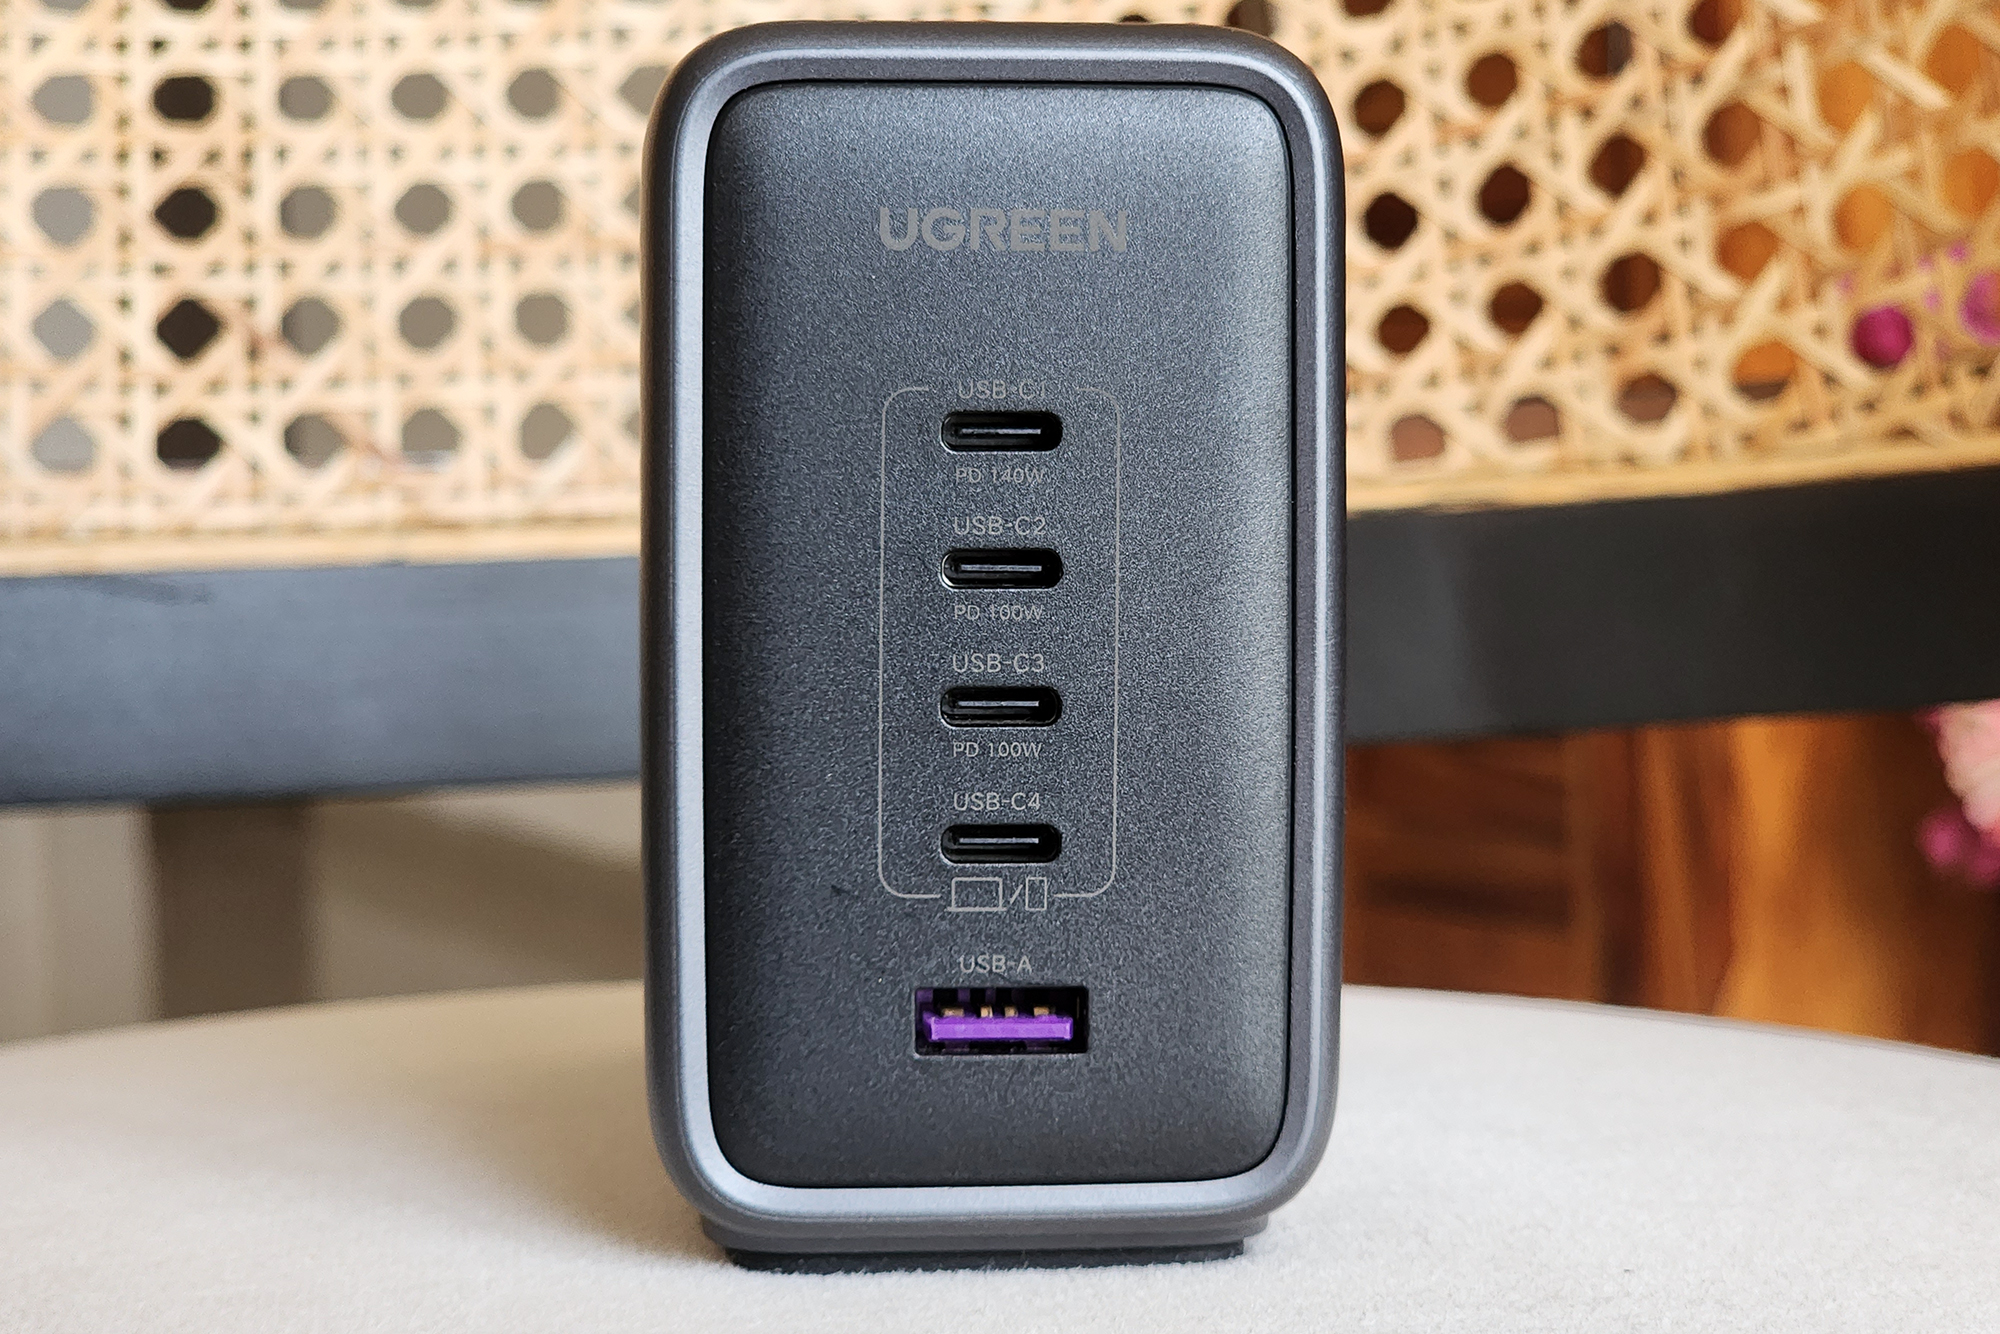 Ugreen's potent new power bank charges 3 gadgets on the go